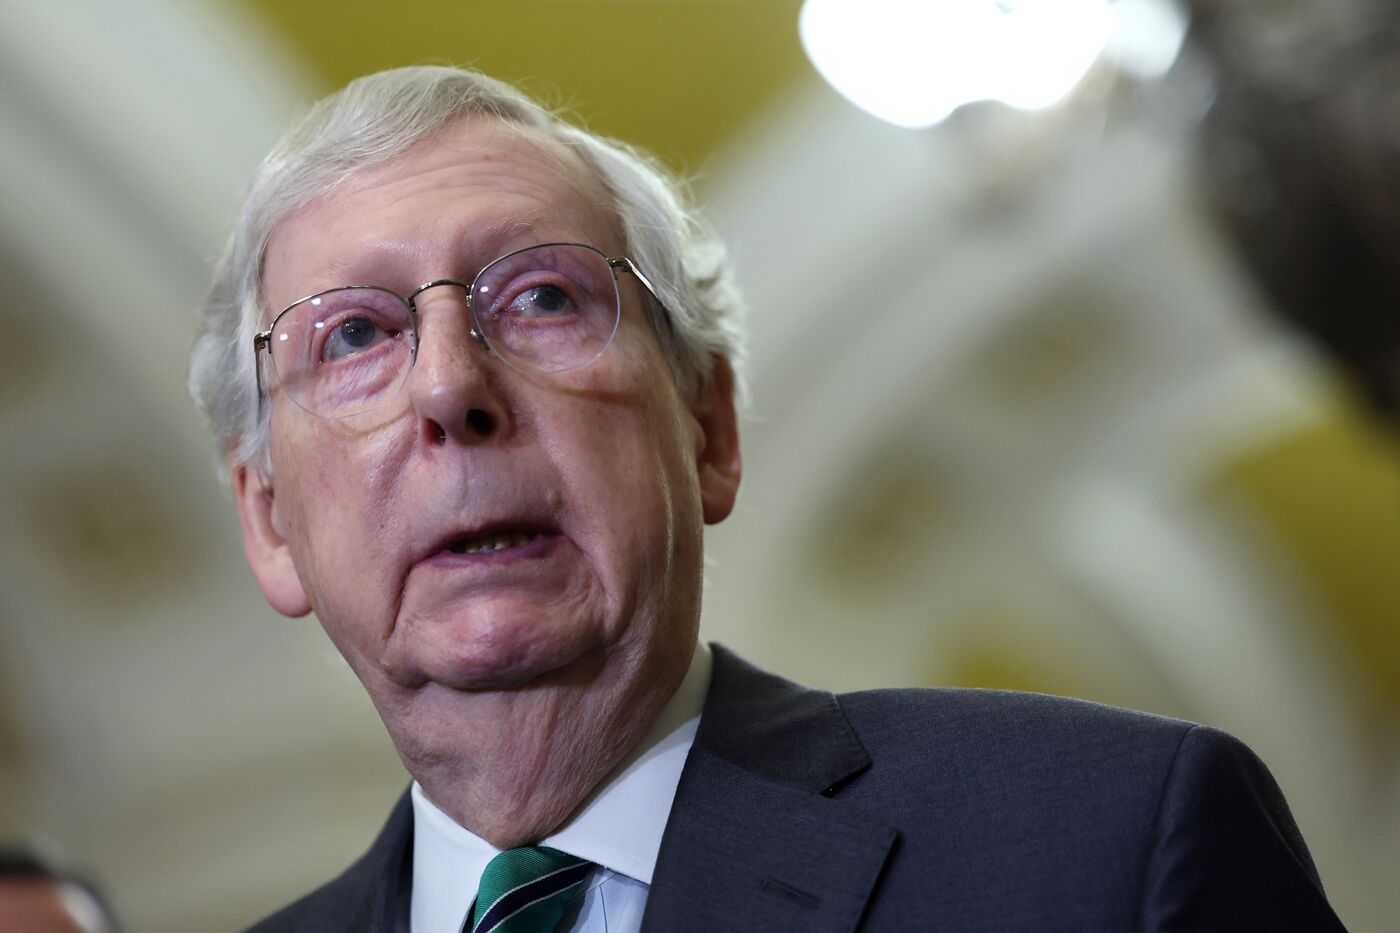 Mitch McConnell Says He Will Remain Republican Leader Through 2024